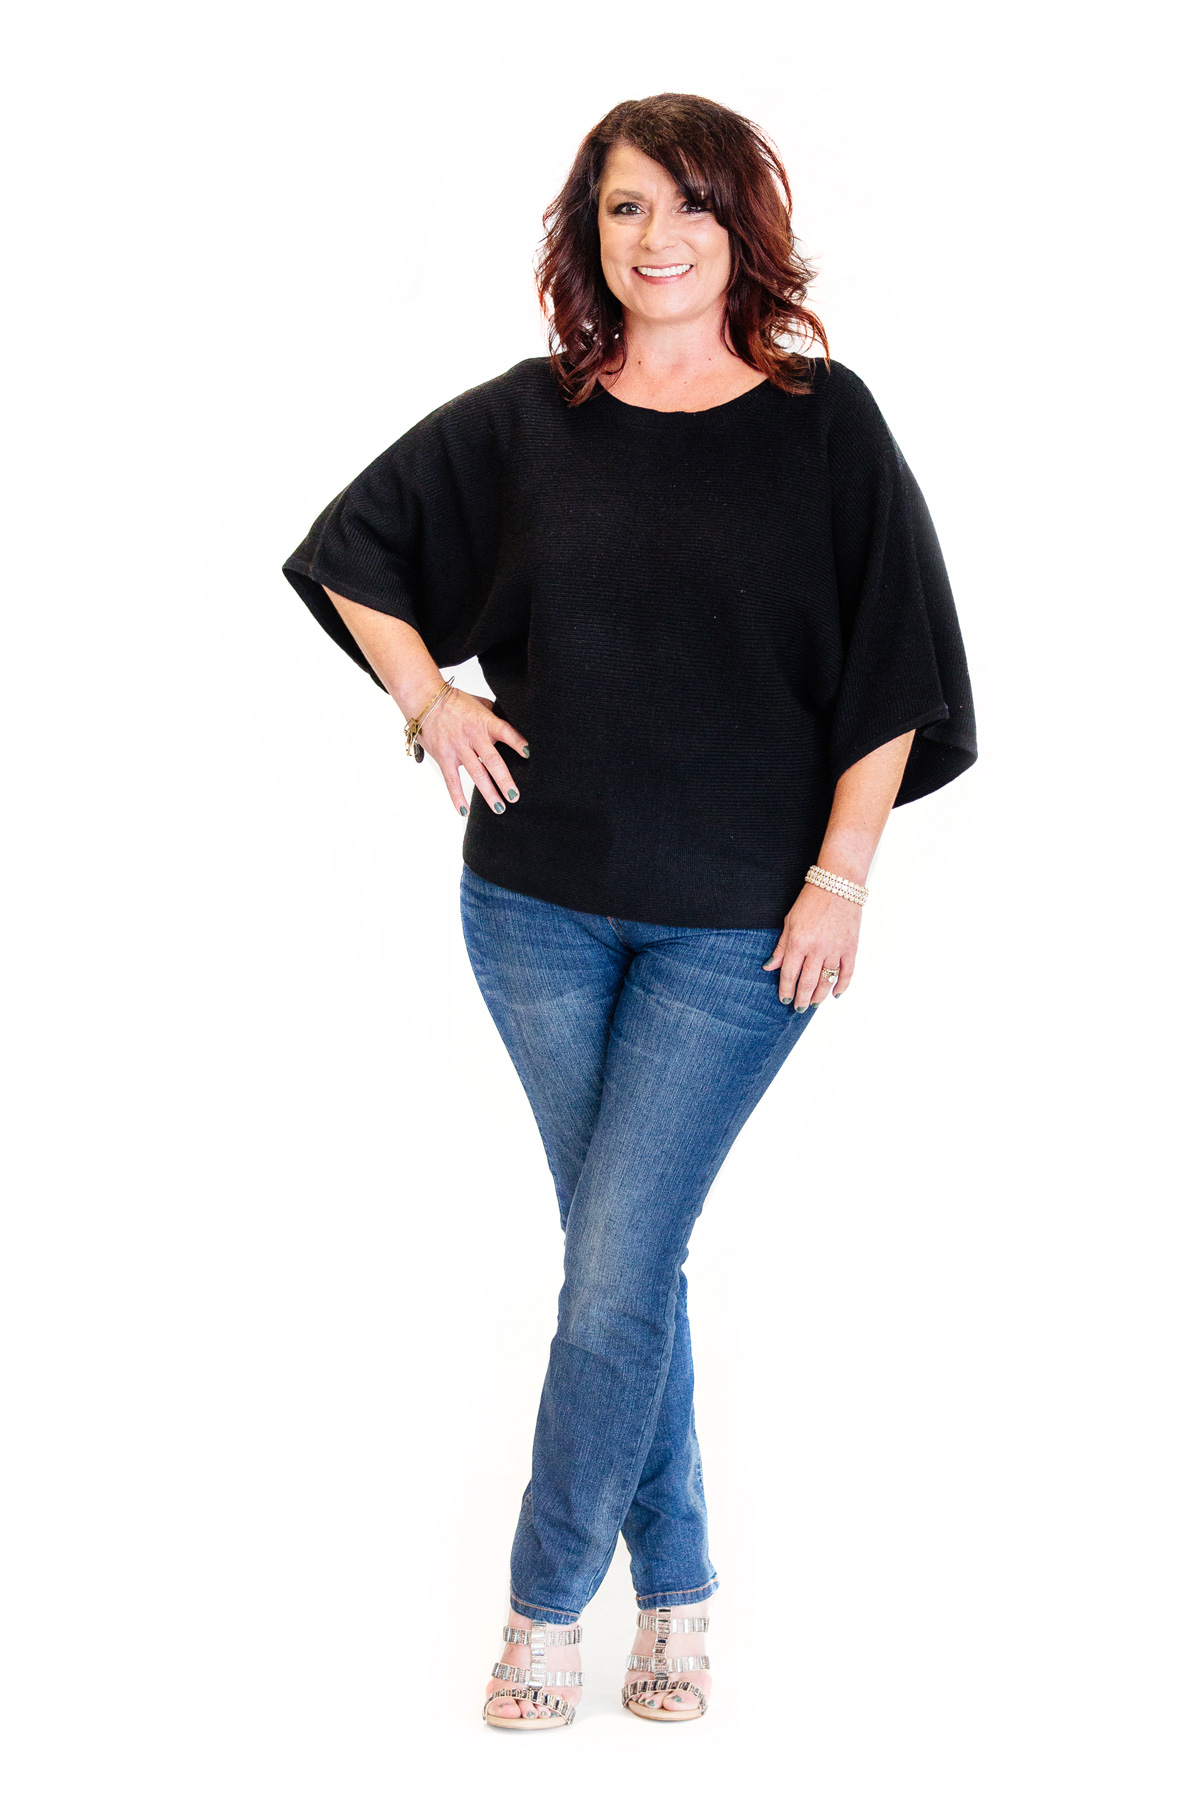 B105 radio personality Chelsie wearing a black top and jeans.